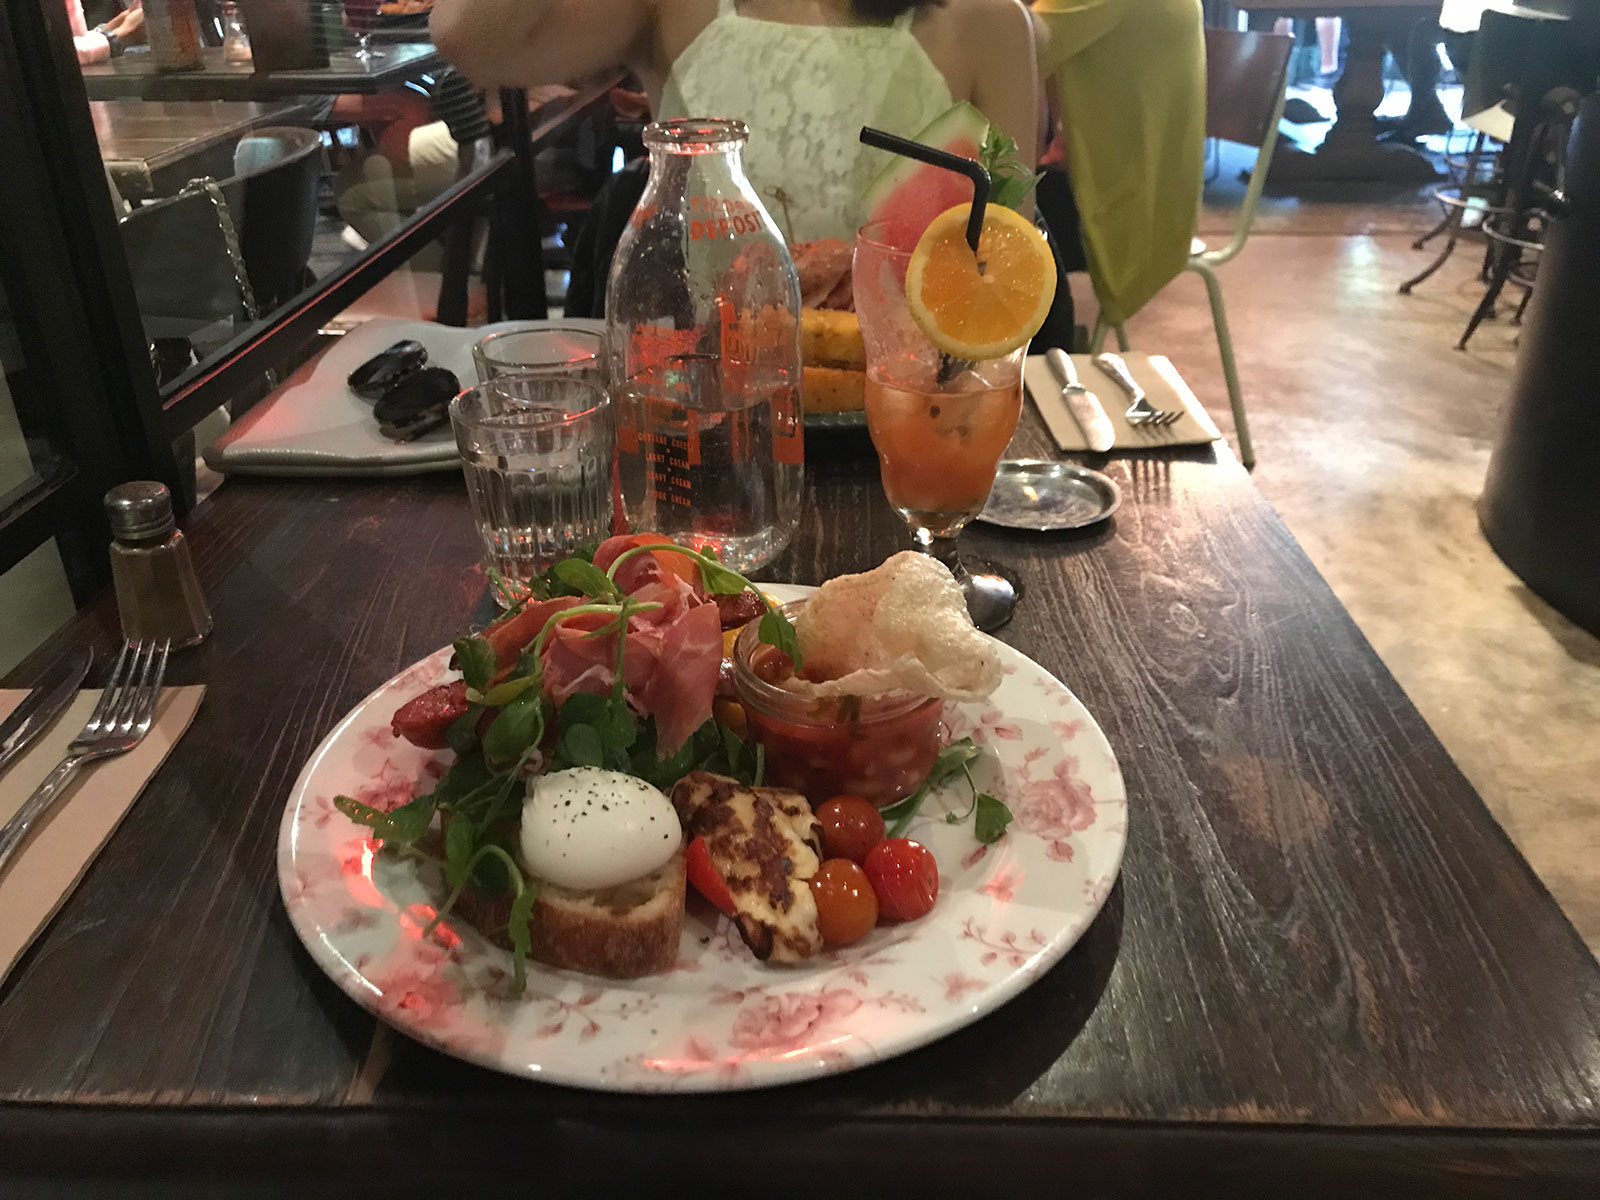 Toast topped with a poached egg, greens, prosciutto and chorizo, with small tomatoes, capsicum and halloumi on the side, served on a white plate with a floral design.